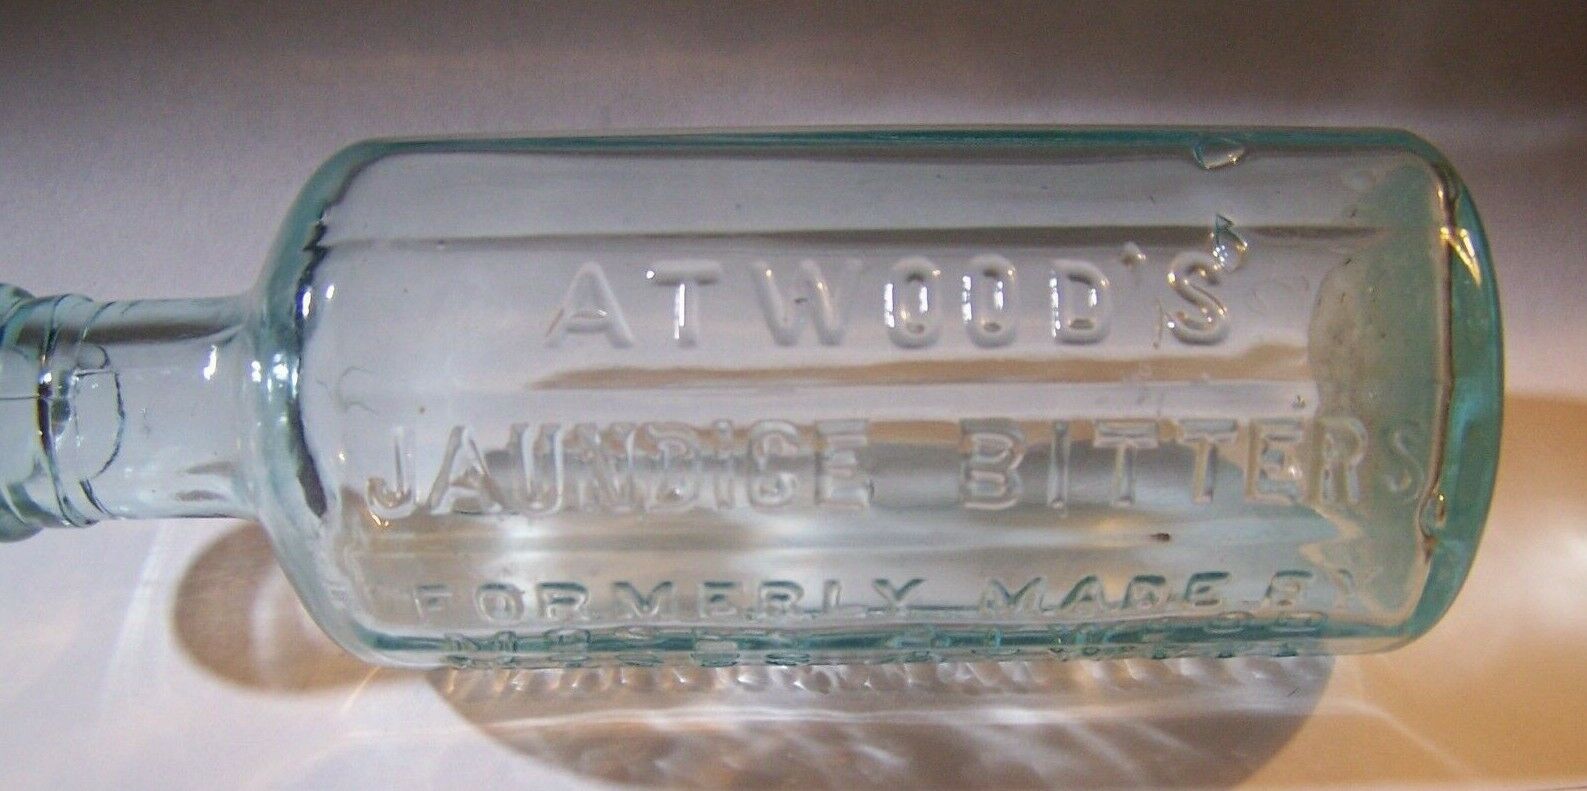 Vintage Atwood's Jaundice Bitters Moses Atwood Georgetown, Mass